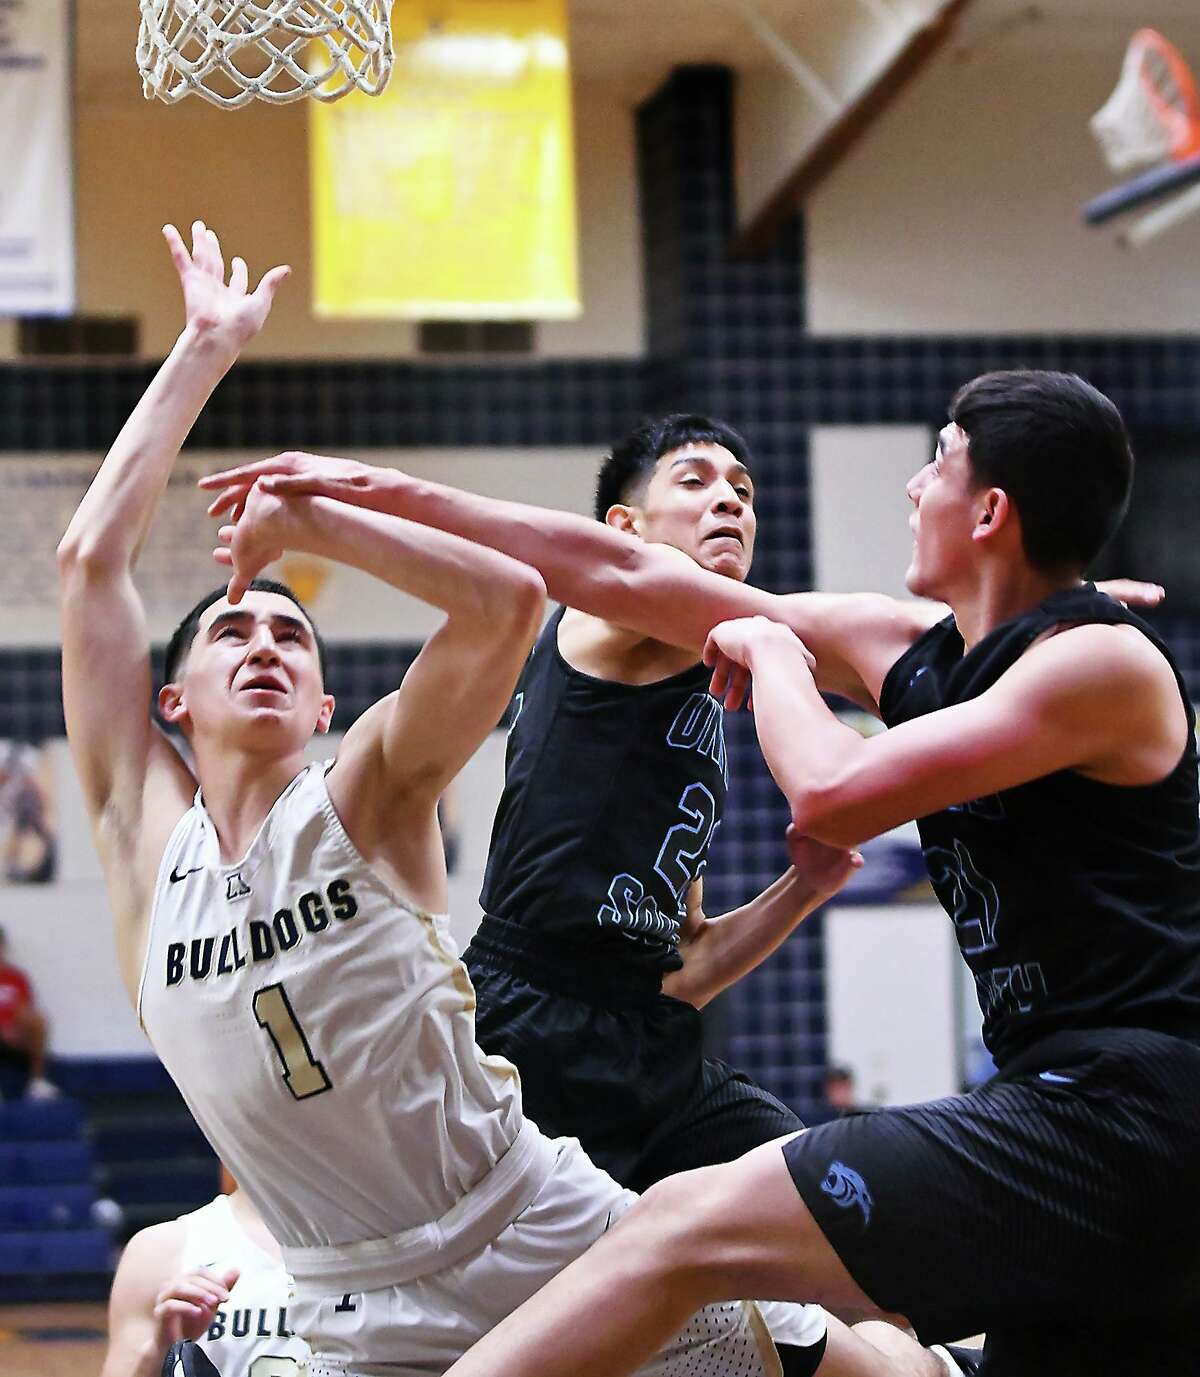 Adrian Orozco drives to the basket for the Alexander Bulldogs as AJ Cisneros and Andy Cisneros defend for the Panthers Tuesday, January 28, 2020 at the Alexander Gym.